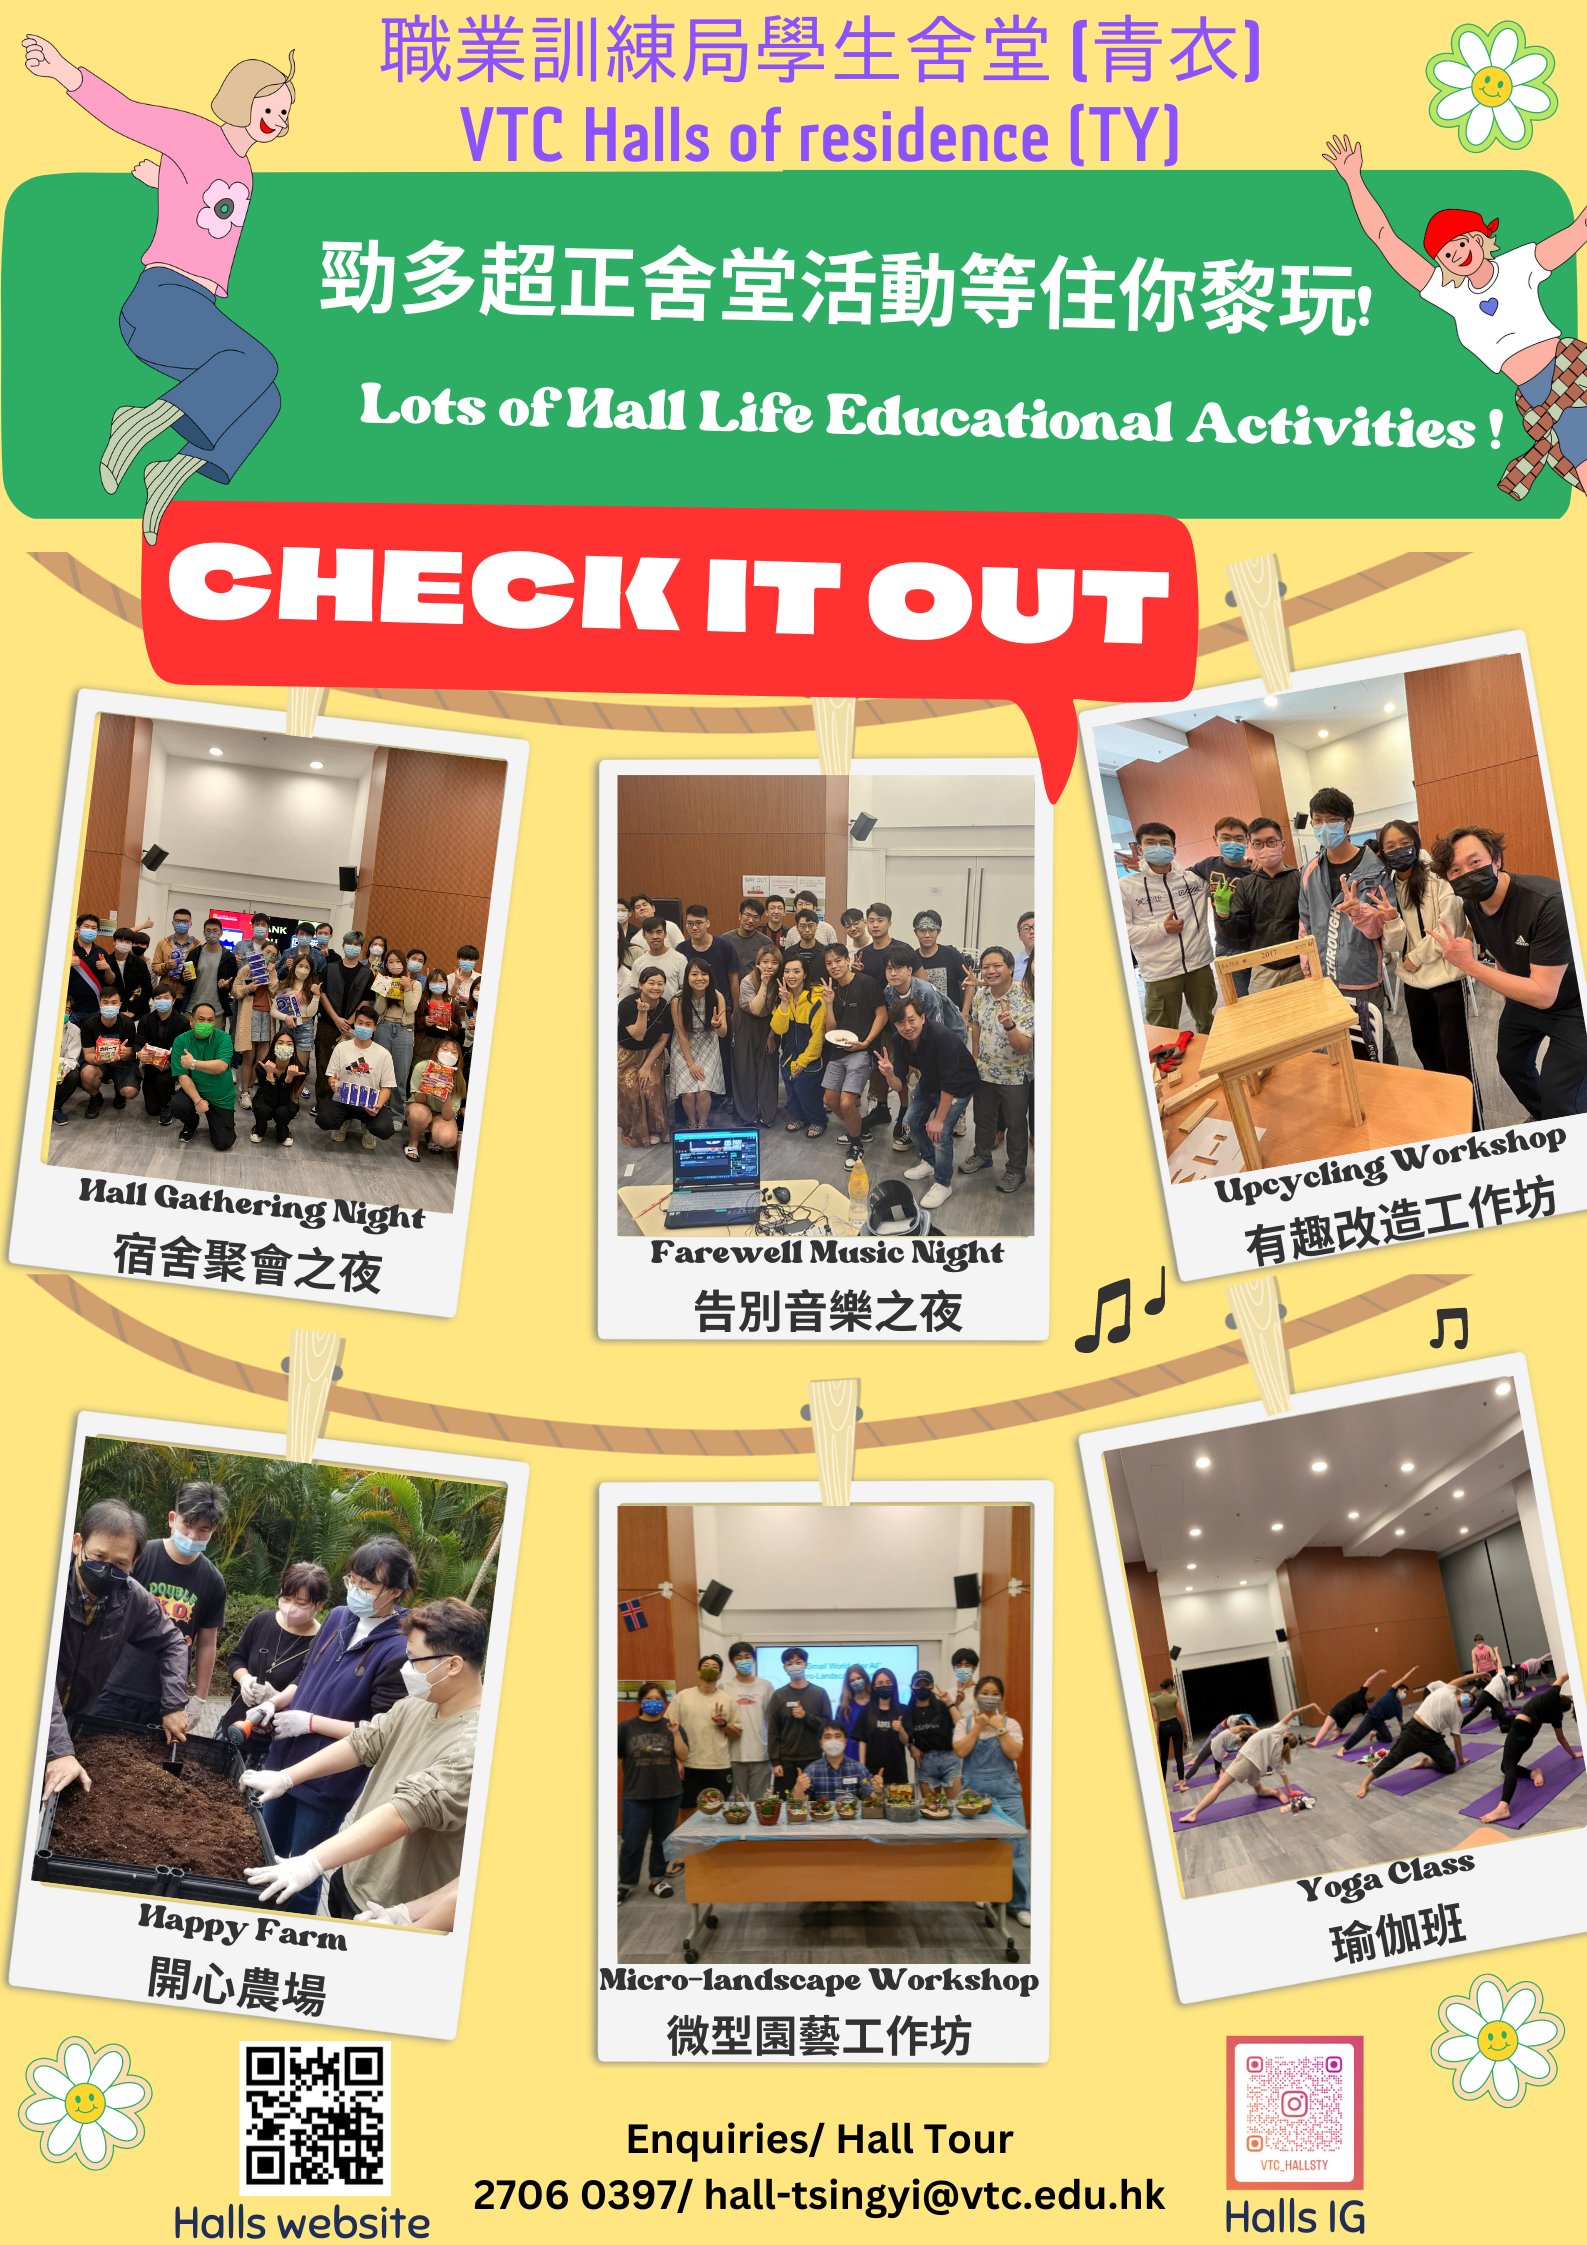 https://d5n8kx03ebljq.cloudfront.net/files/8ll1yb9nd-Halls(TY)admissionpromtionposter)_Hallsactivities.png